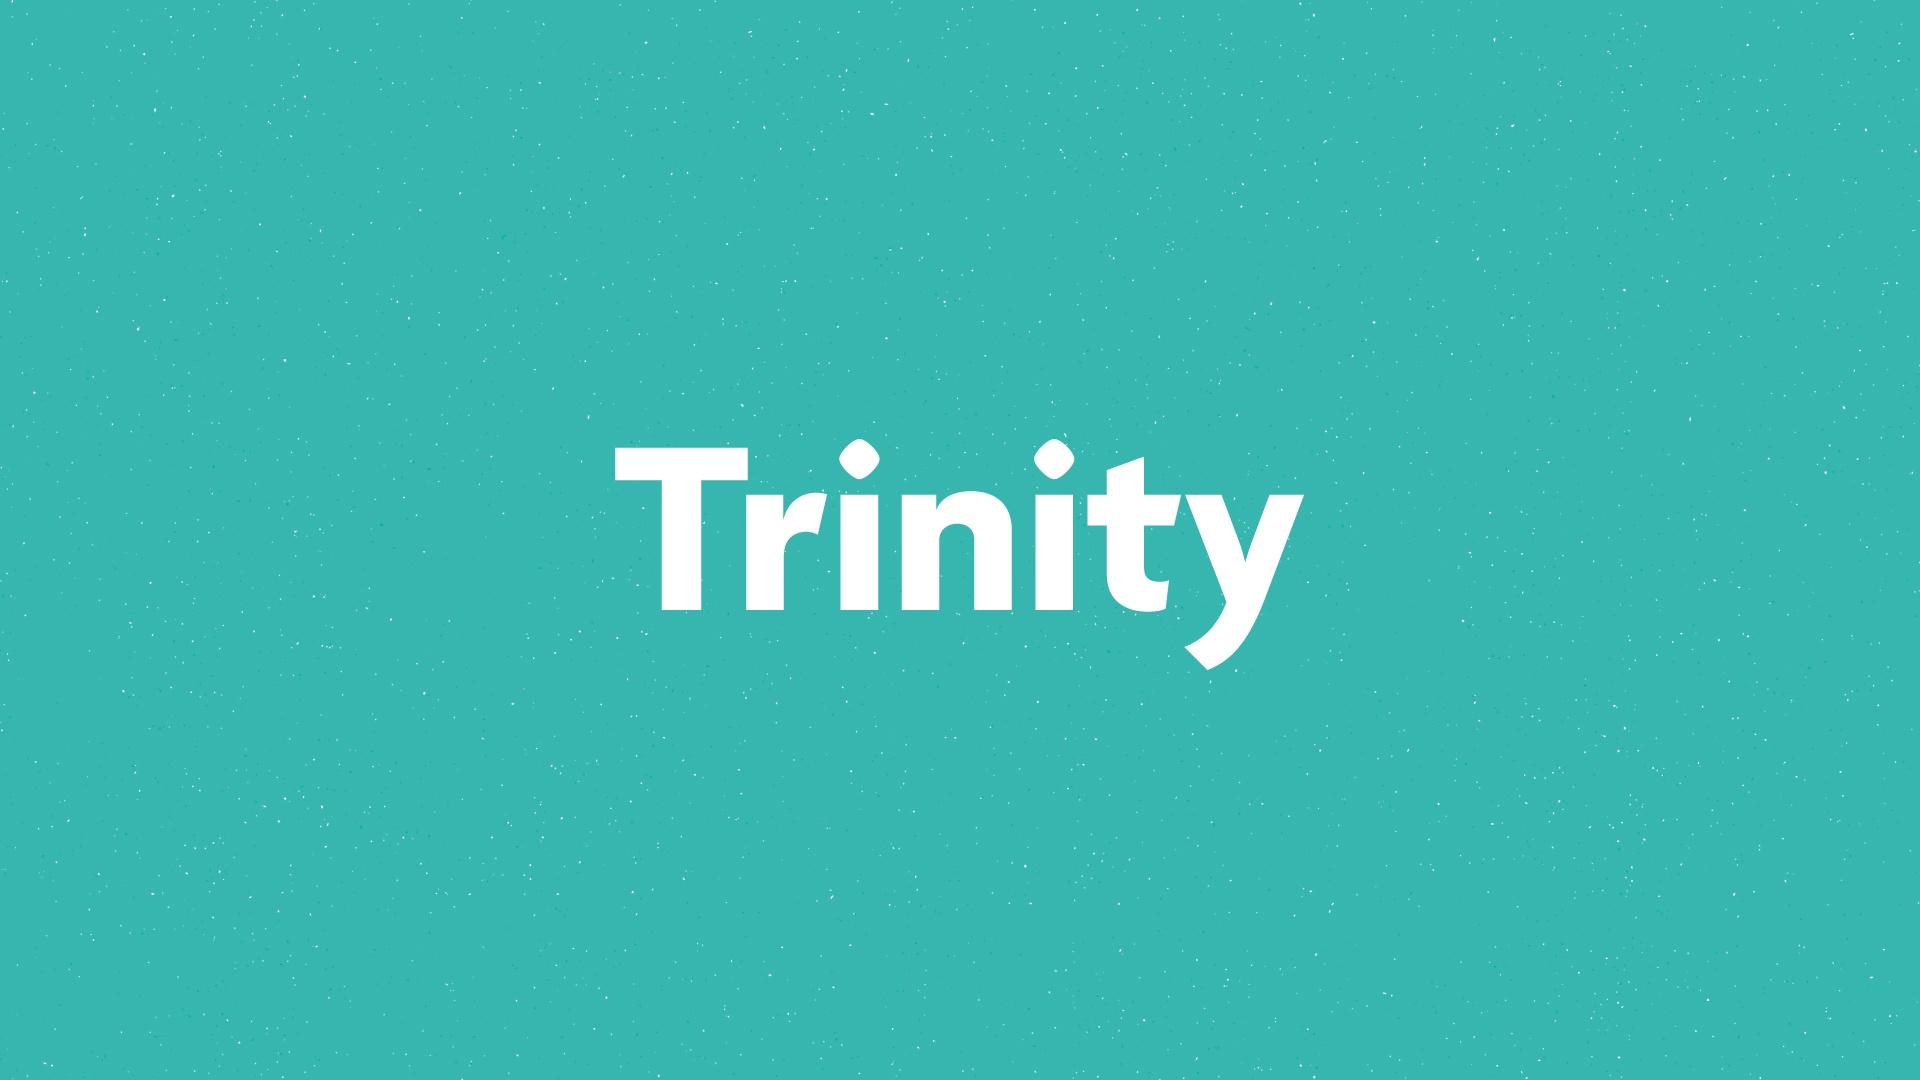 Trinity book submission card on a green background.